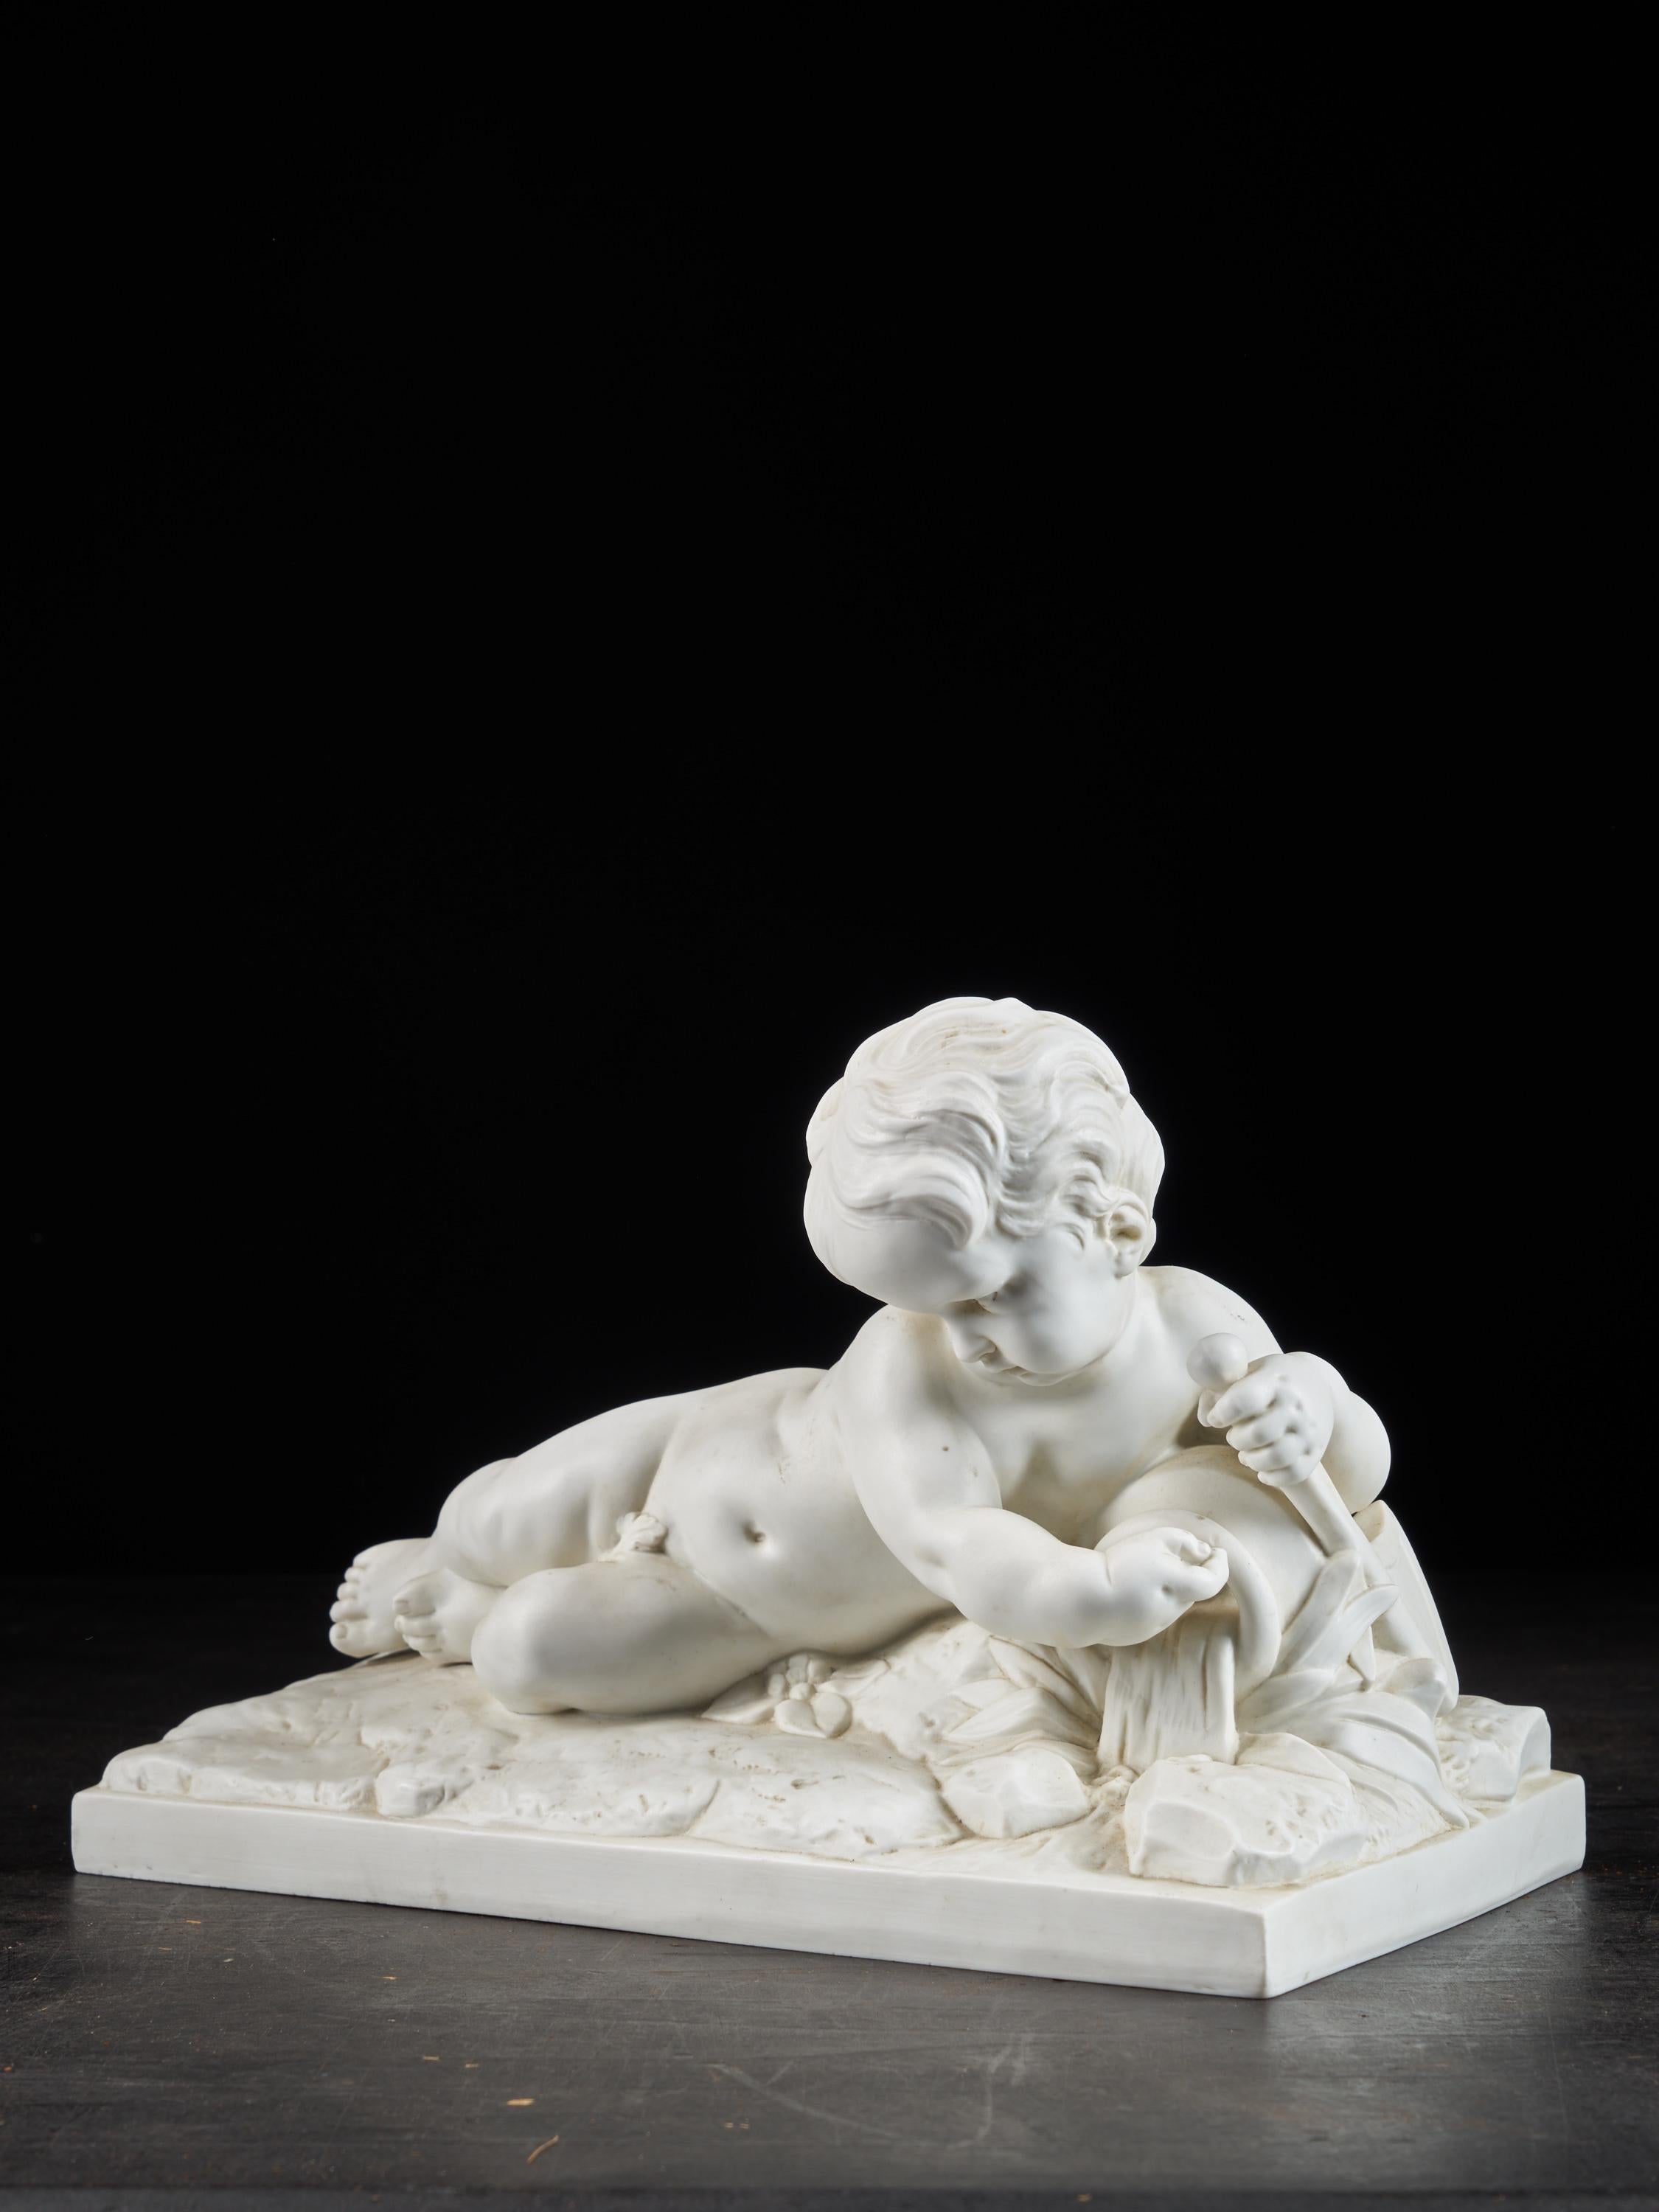 A lovely small sculpture of a lying angel signed ‘Fiamingo’ fecit (called Il Fiammingo which means Flemish in Italian). The sculpture is made after the Flemish sculptor François Duquesnoy (1597 - 1643). His idealized representations are often